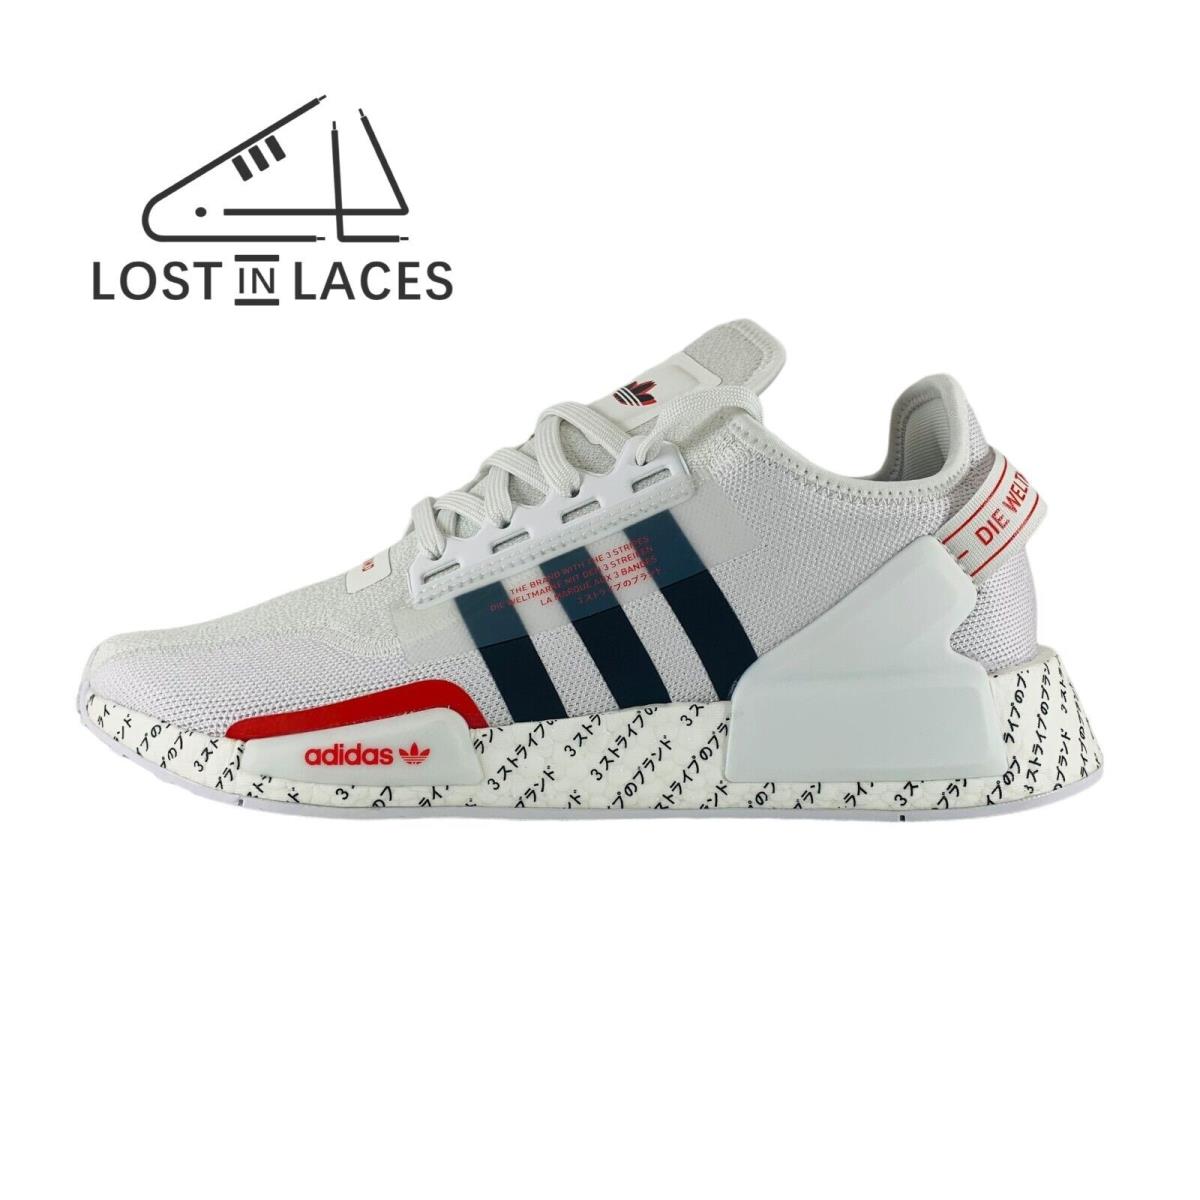 Adidas NMD_R1 v2 White Red Japanese Print Men`s Sneakers ID2853 - White